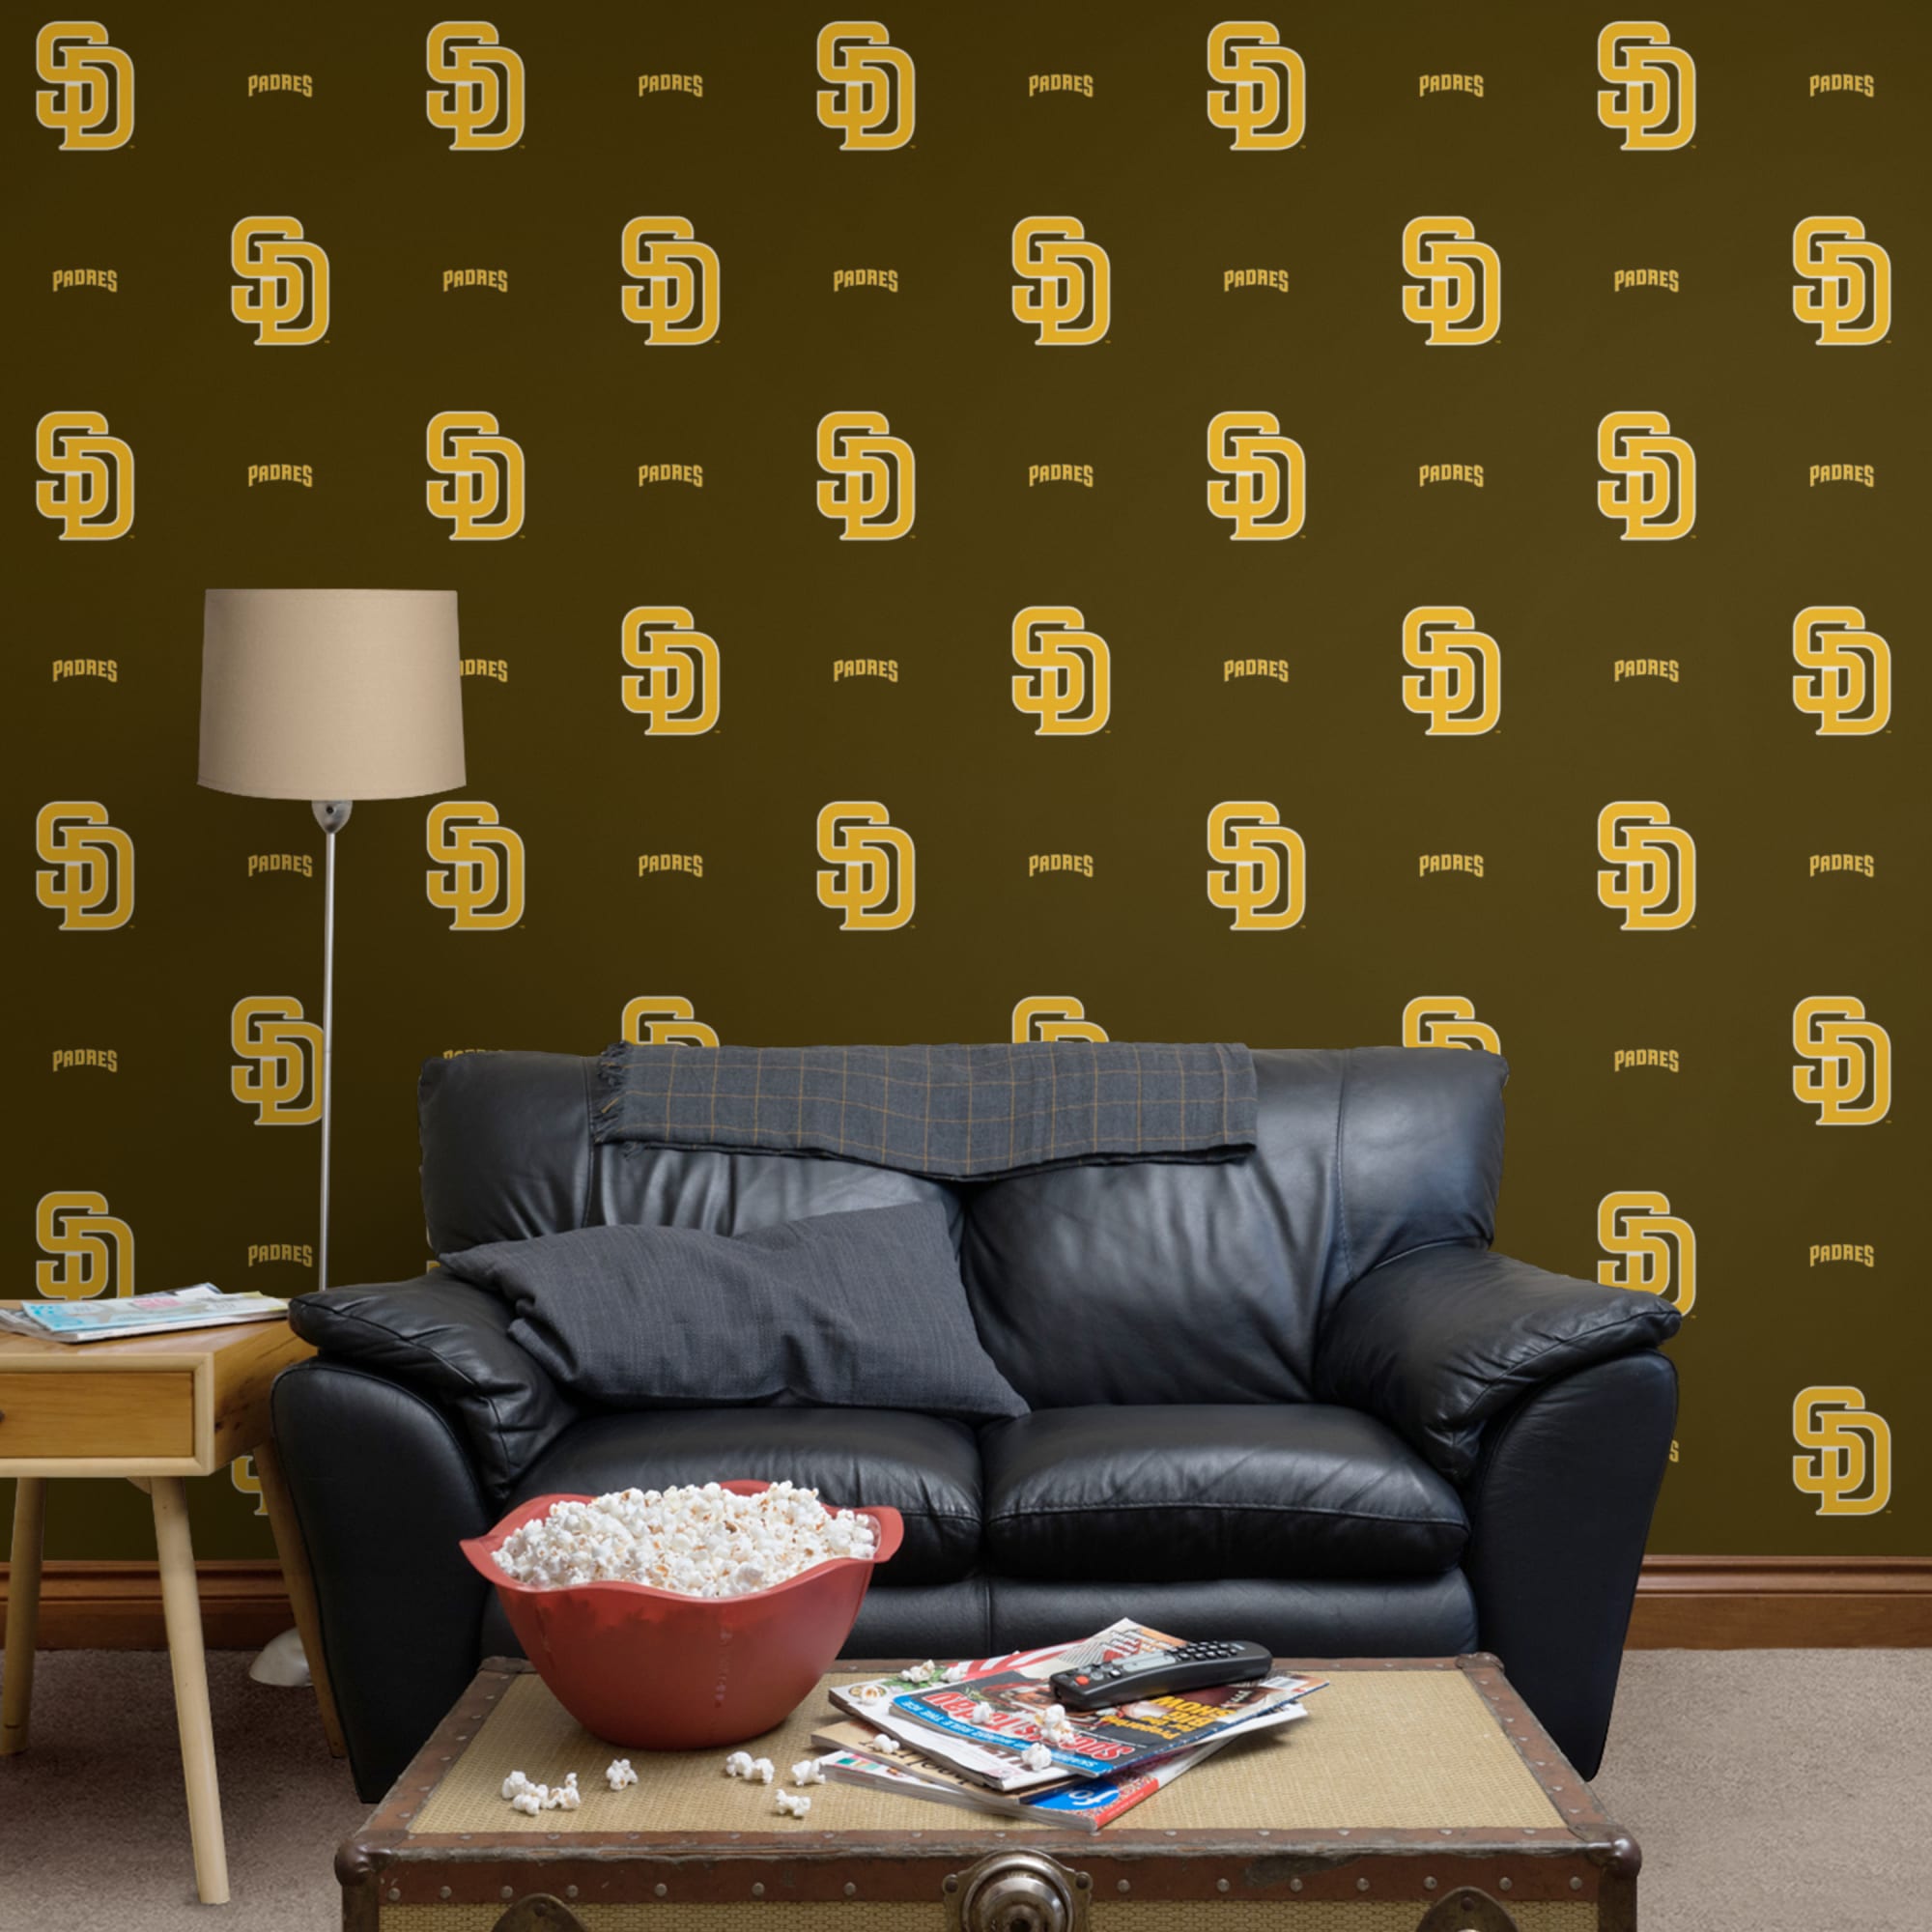 San Diego Padres: Logo Pattern - Officially Licensed Removable Wallpaper 12" x 12" Sample by Fathead